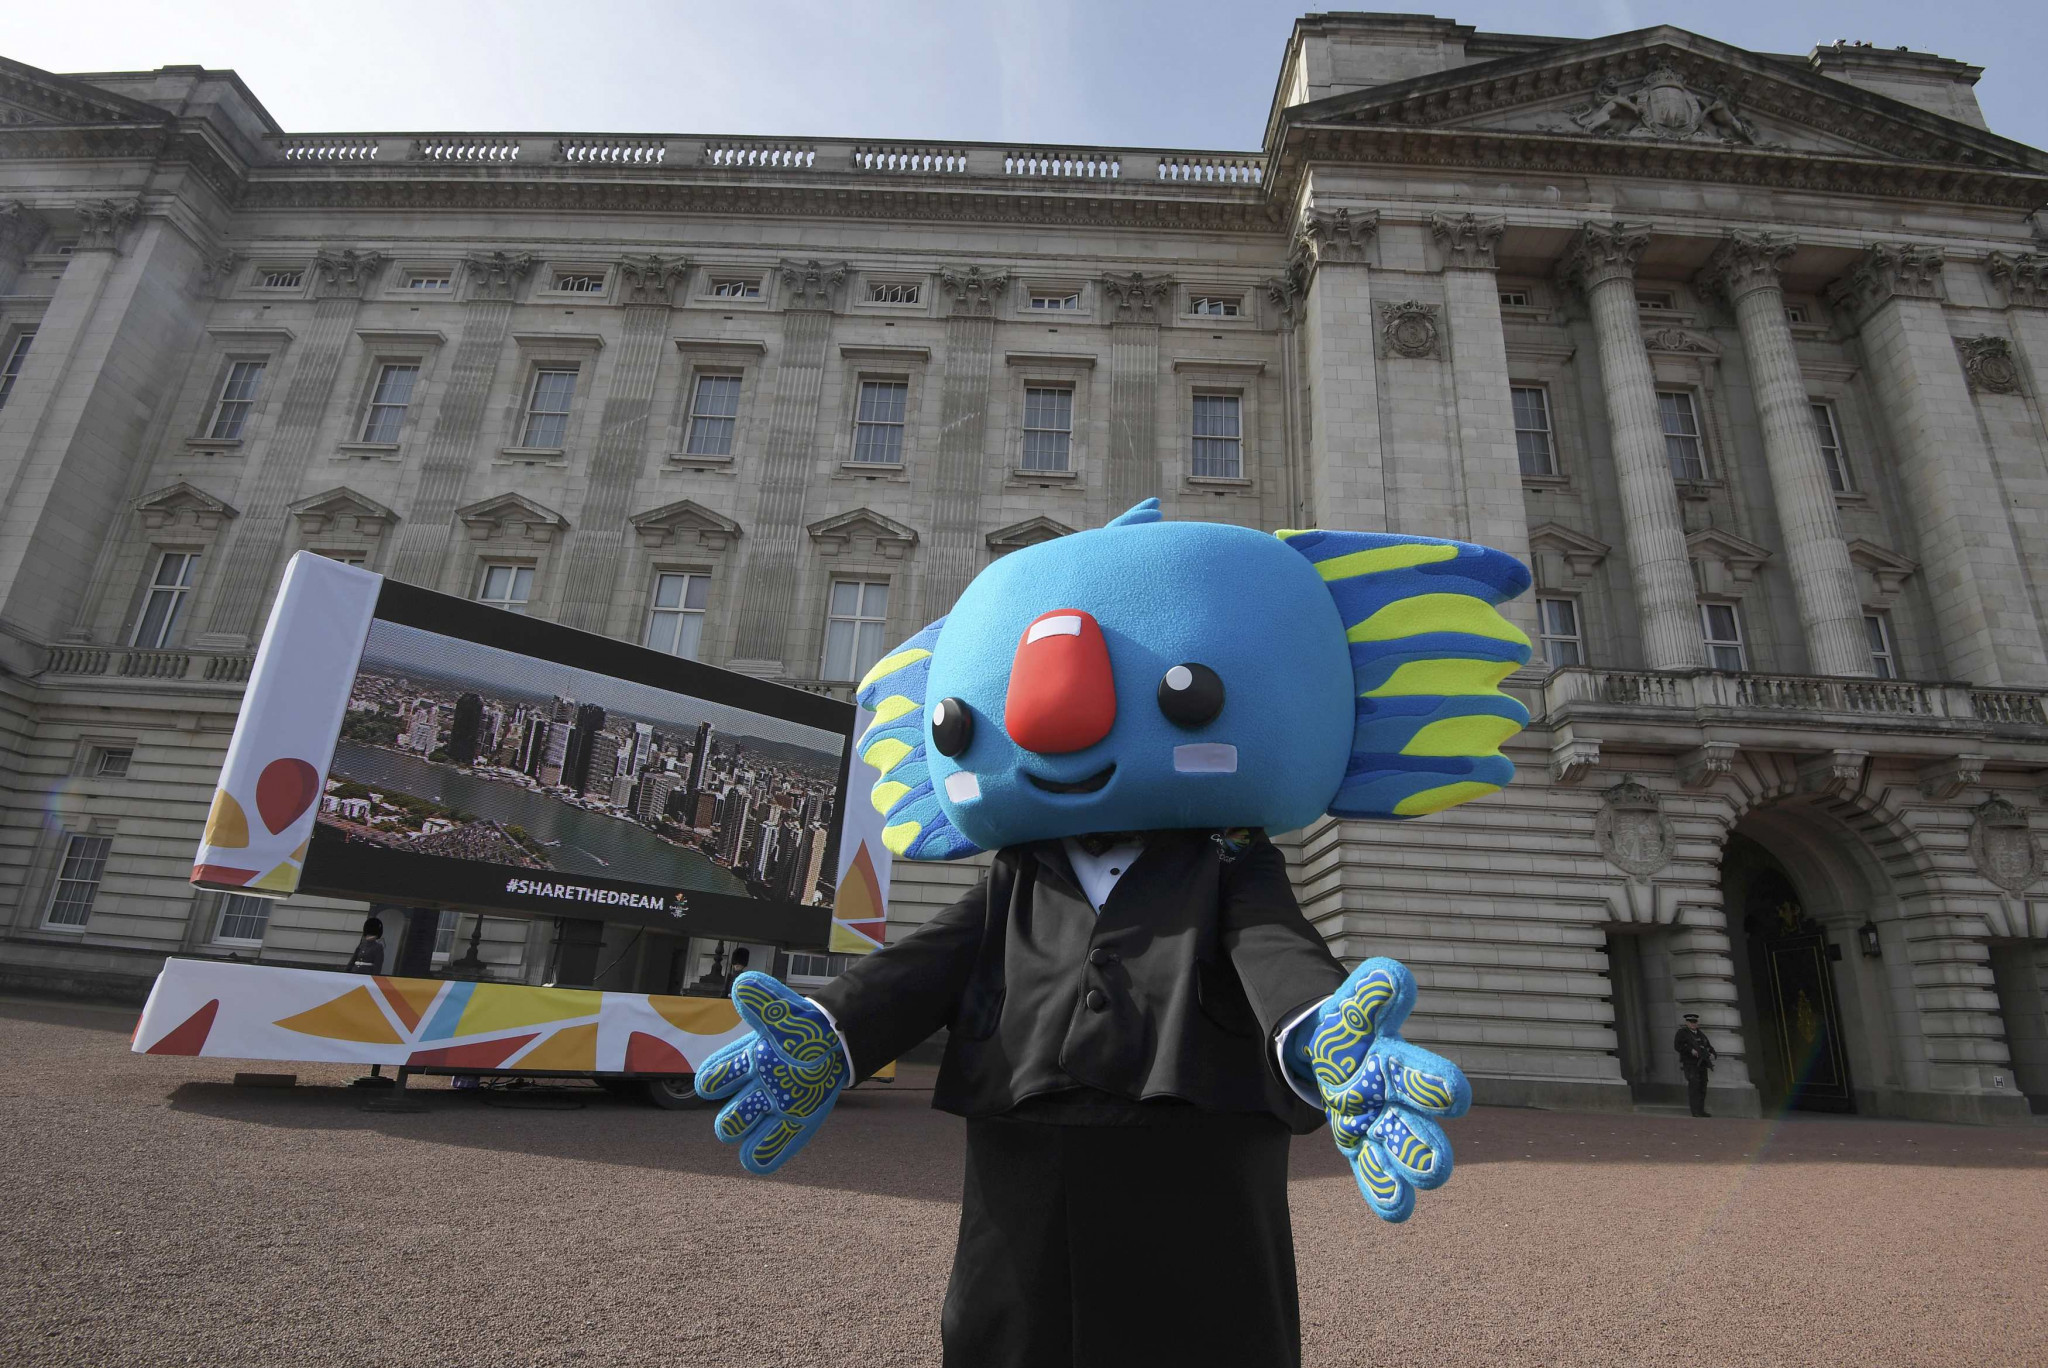 Gold Coast 2018 mascot Borobi was in dancing mood at the start of the Queen's Baton Relay at Buckingham Palace ©Getty Images